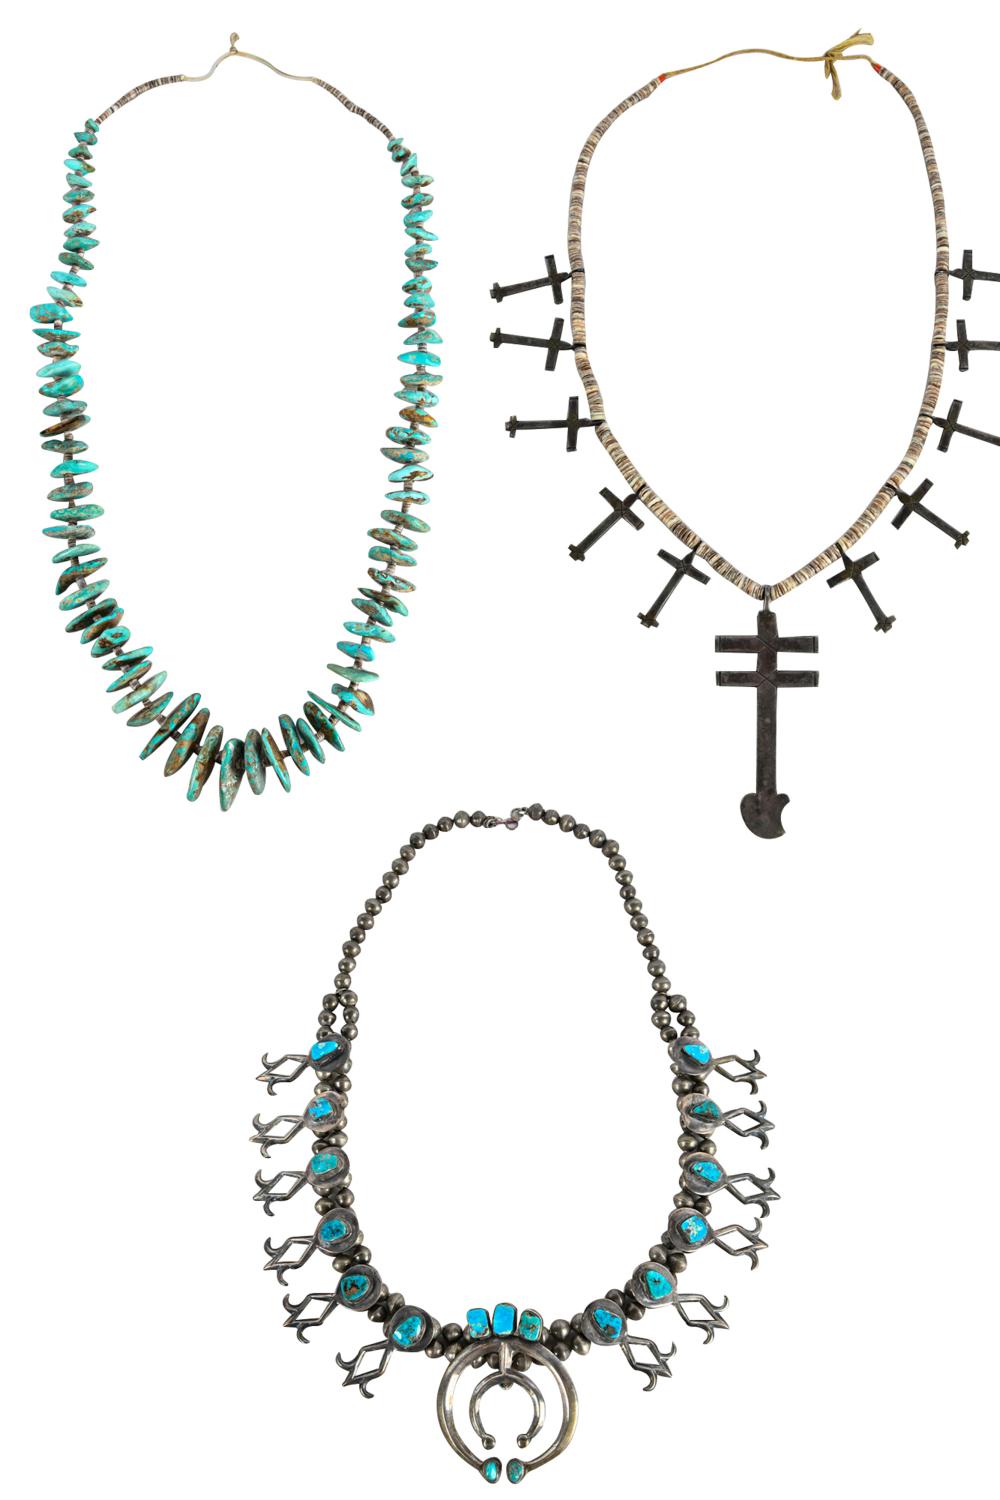 THREE SOUTHWEST NAVAJO STYLE NECKLACEScomprising: